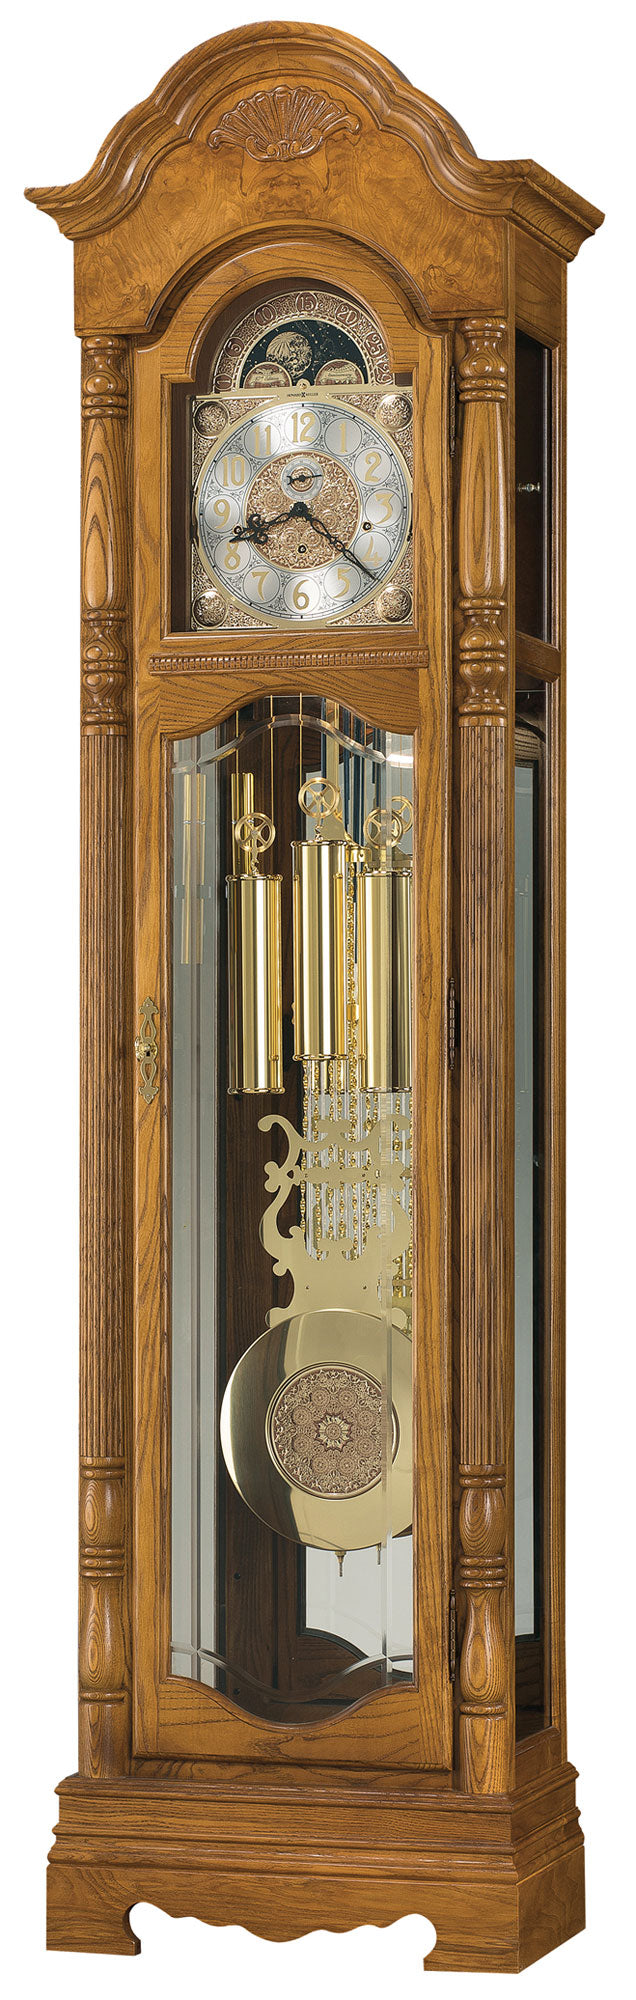 Browman Grandfather Clock by Howard Miller